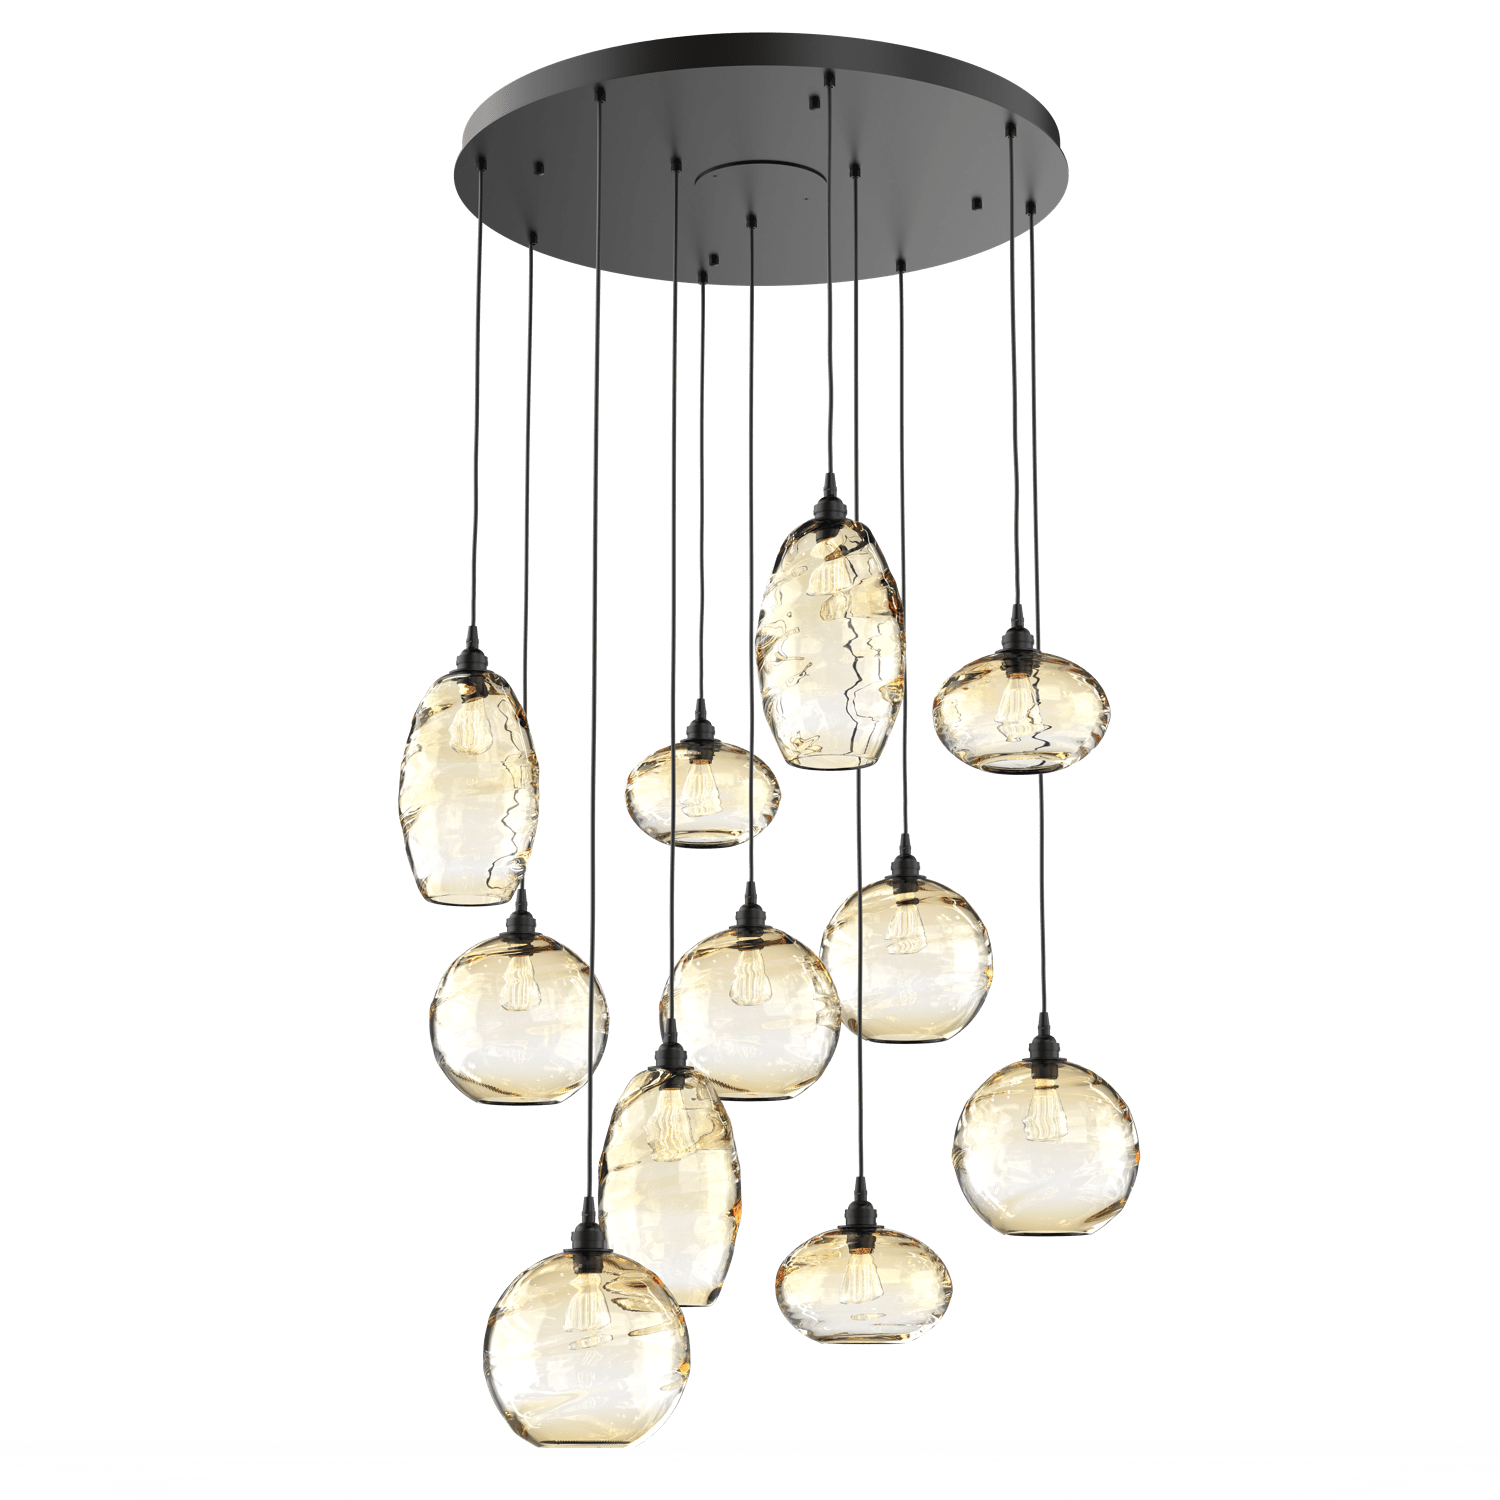 CHB0048-11-MB-OA-Hammerton-Studio-Optic-Blown-Glass-Misto-11-light-round-pendant-chandelier-with-matte-black-finish-and-optic-amber-blown-glass-shades-and-incandescent-lamping